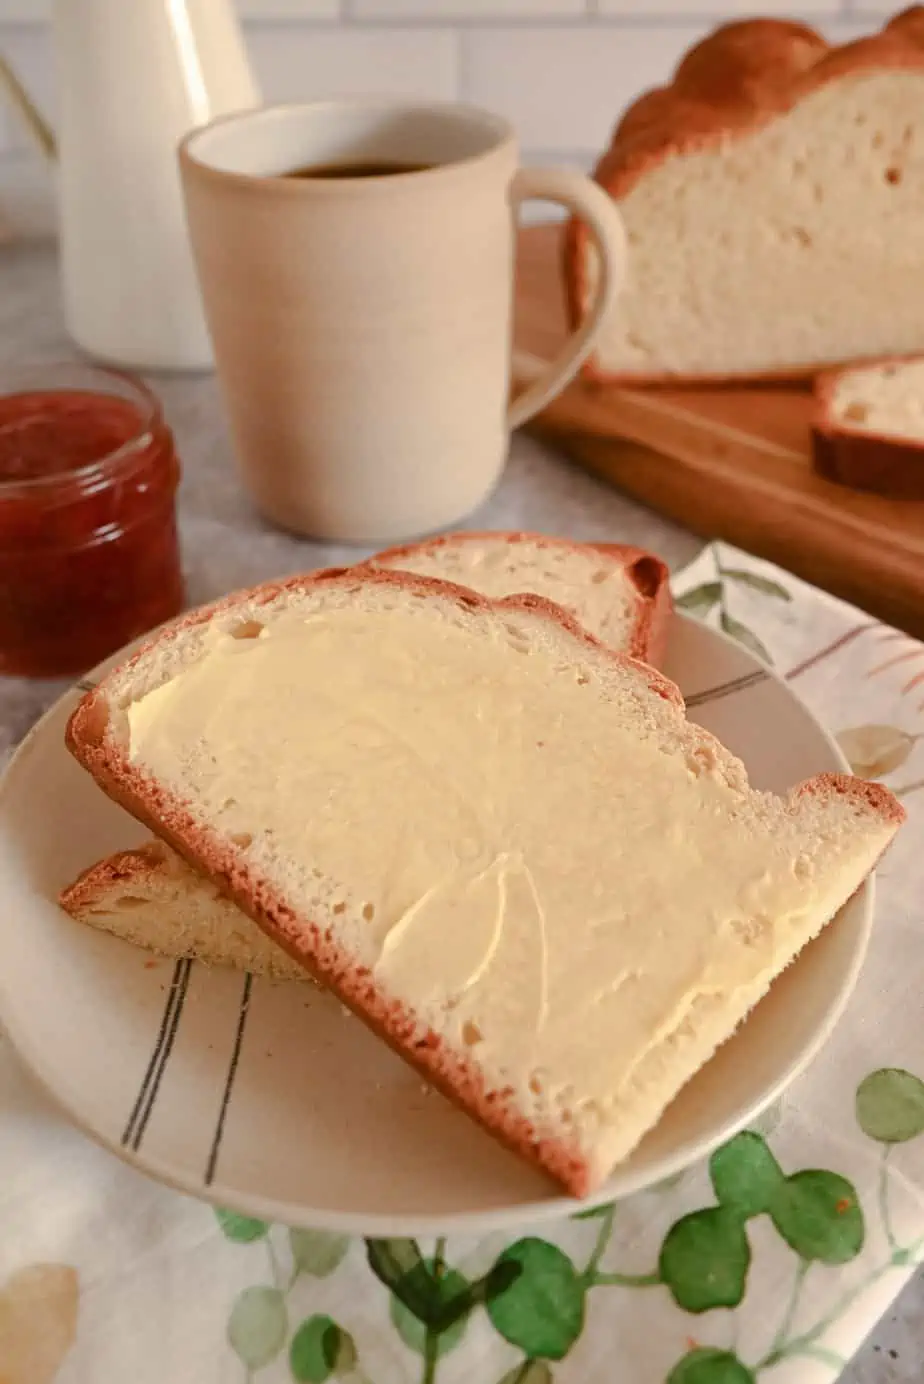 Two slices of buttered paska on a plate